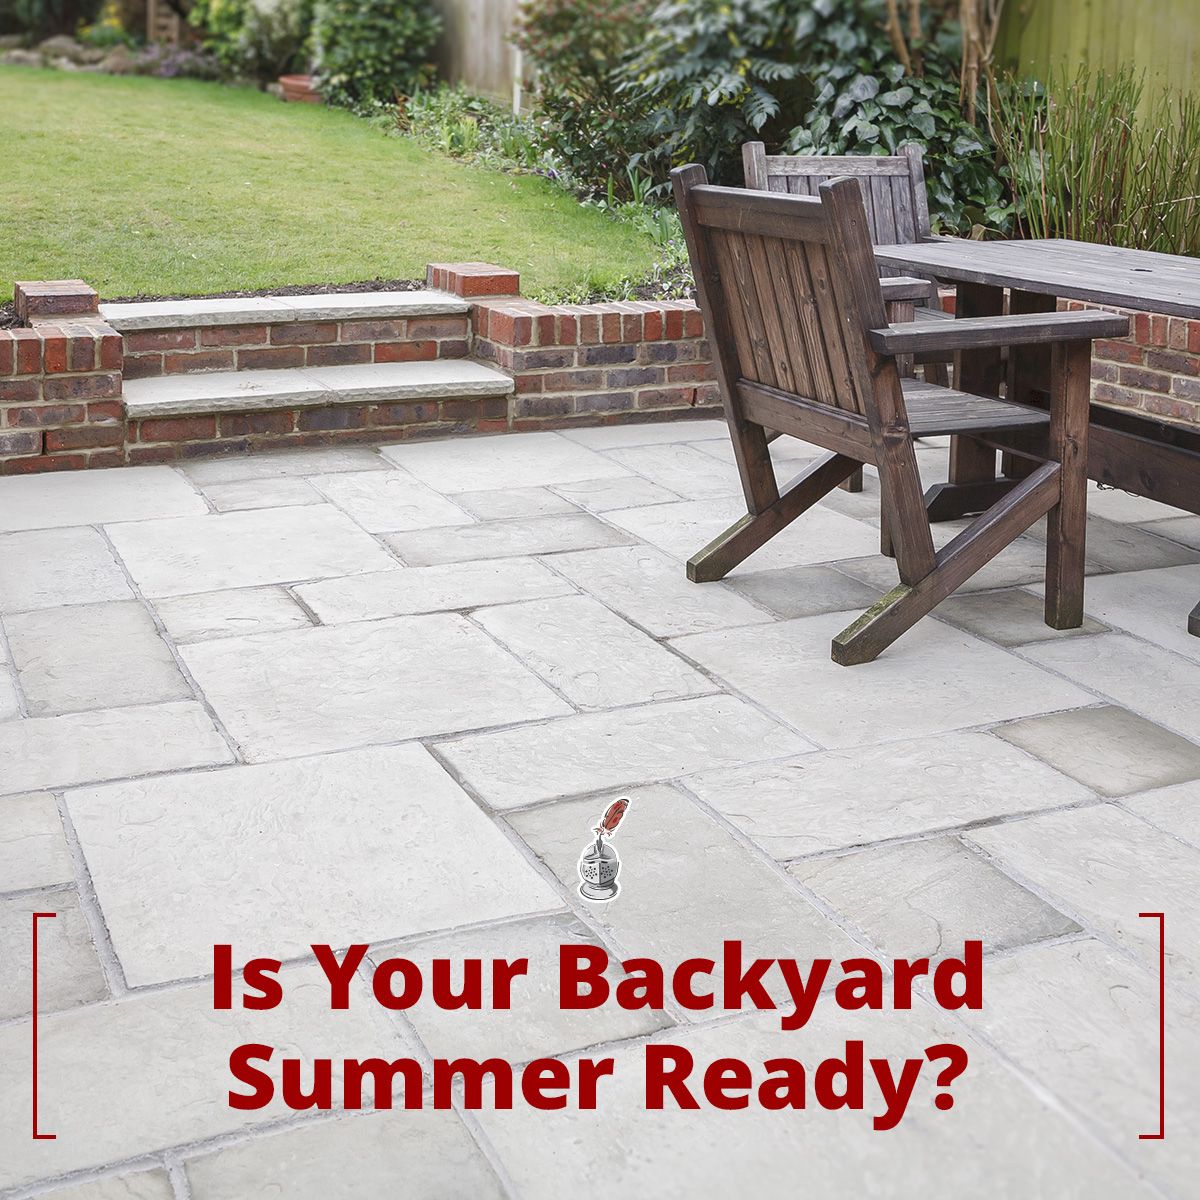 Is Your Backyard Summer Ready?